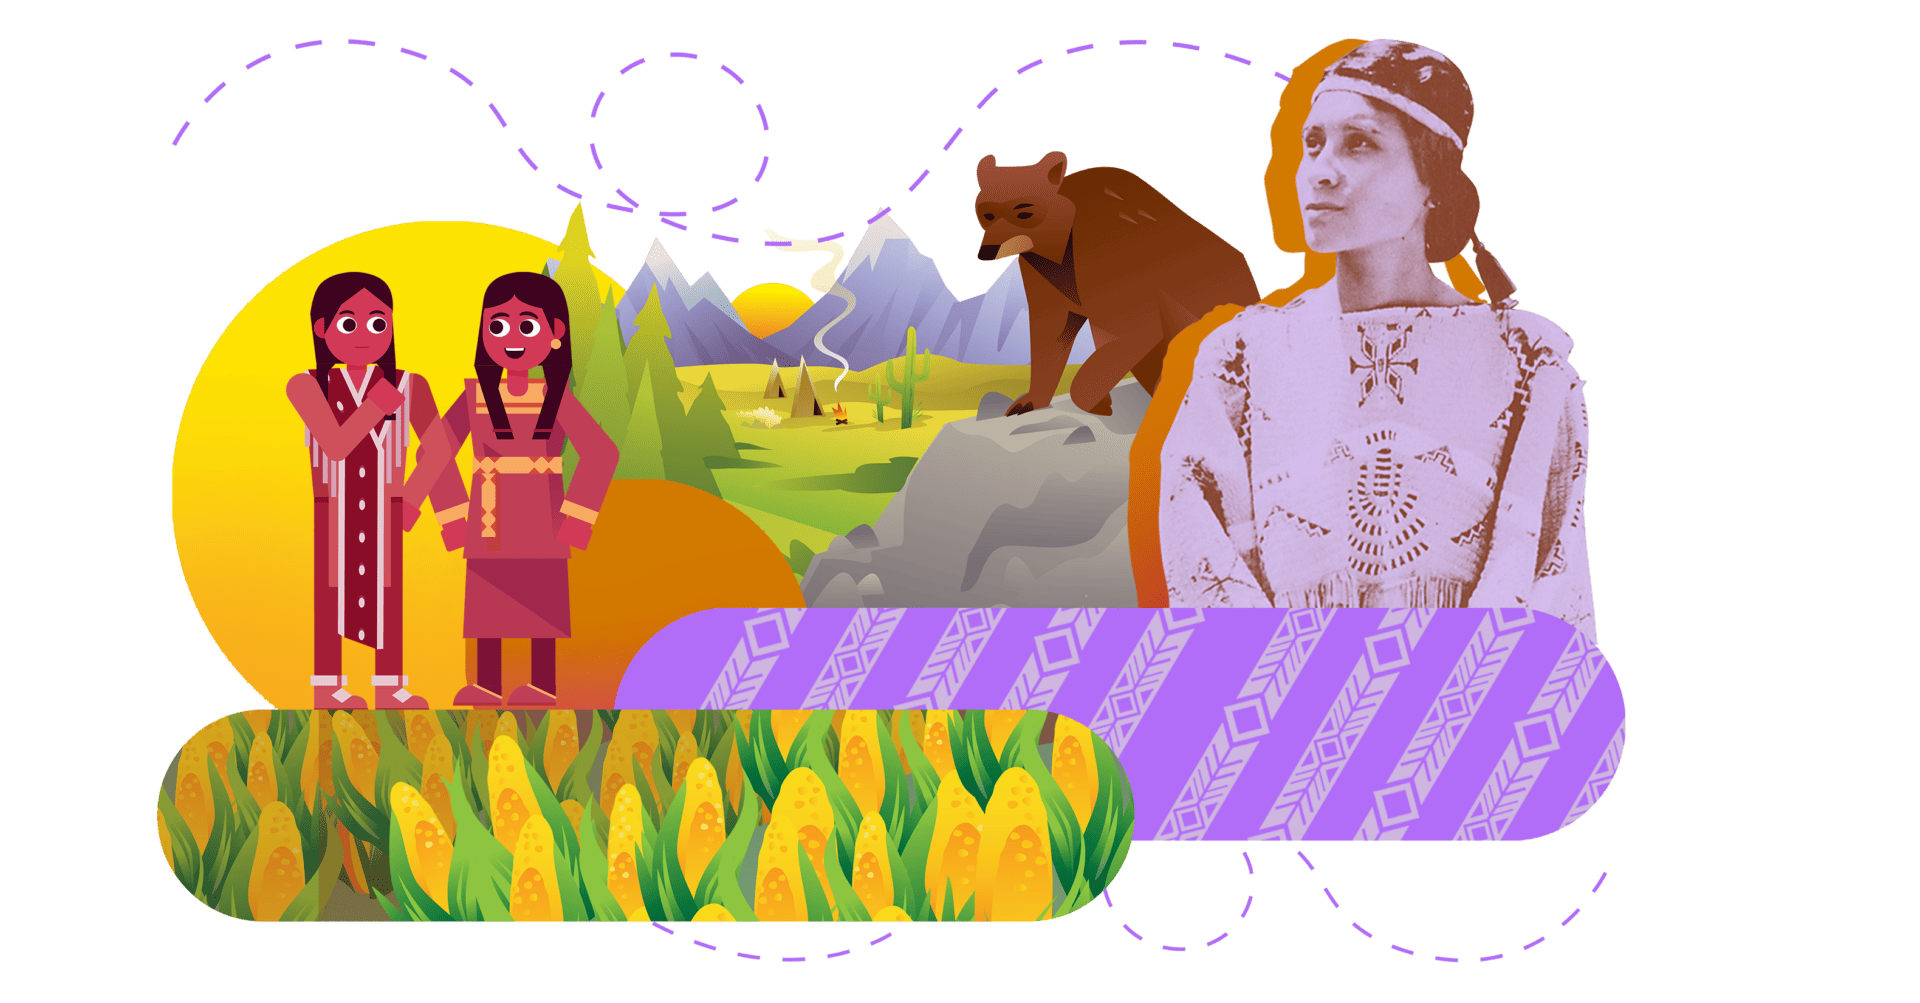 Illustration featuring two parts: on the left, two women in traditional attire with rural landscape and a bear; on the right, a statue of a woman with intricate details related to an online language arts